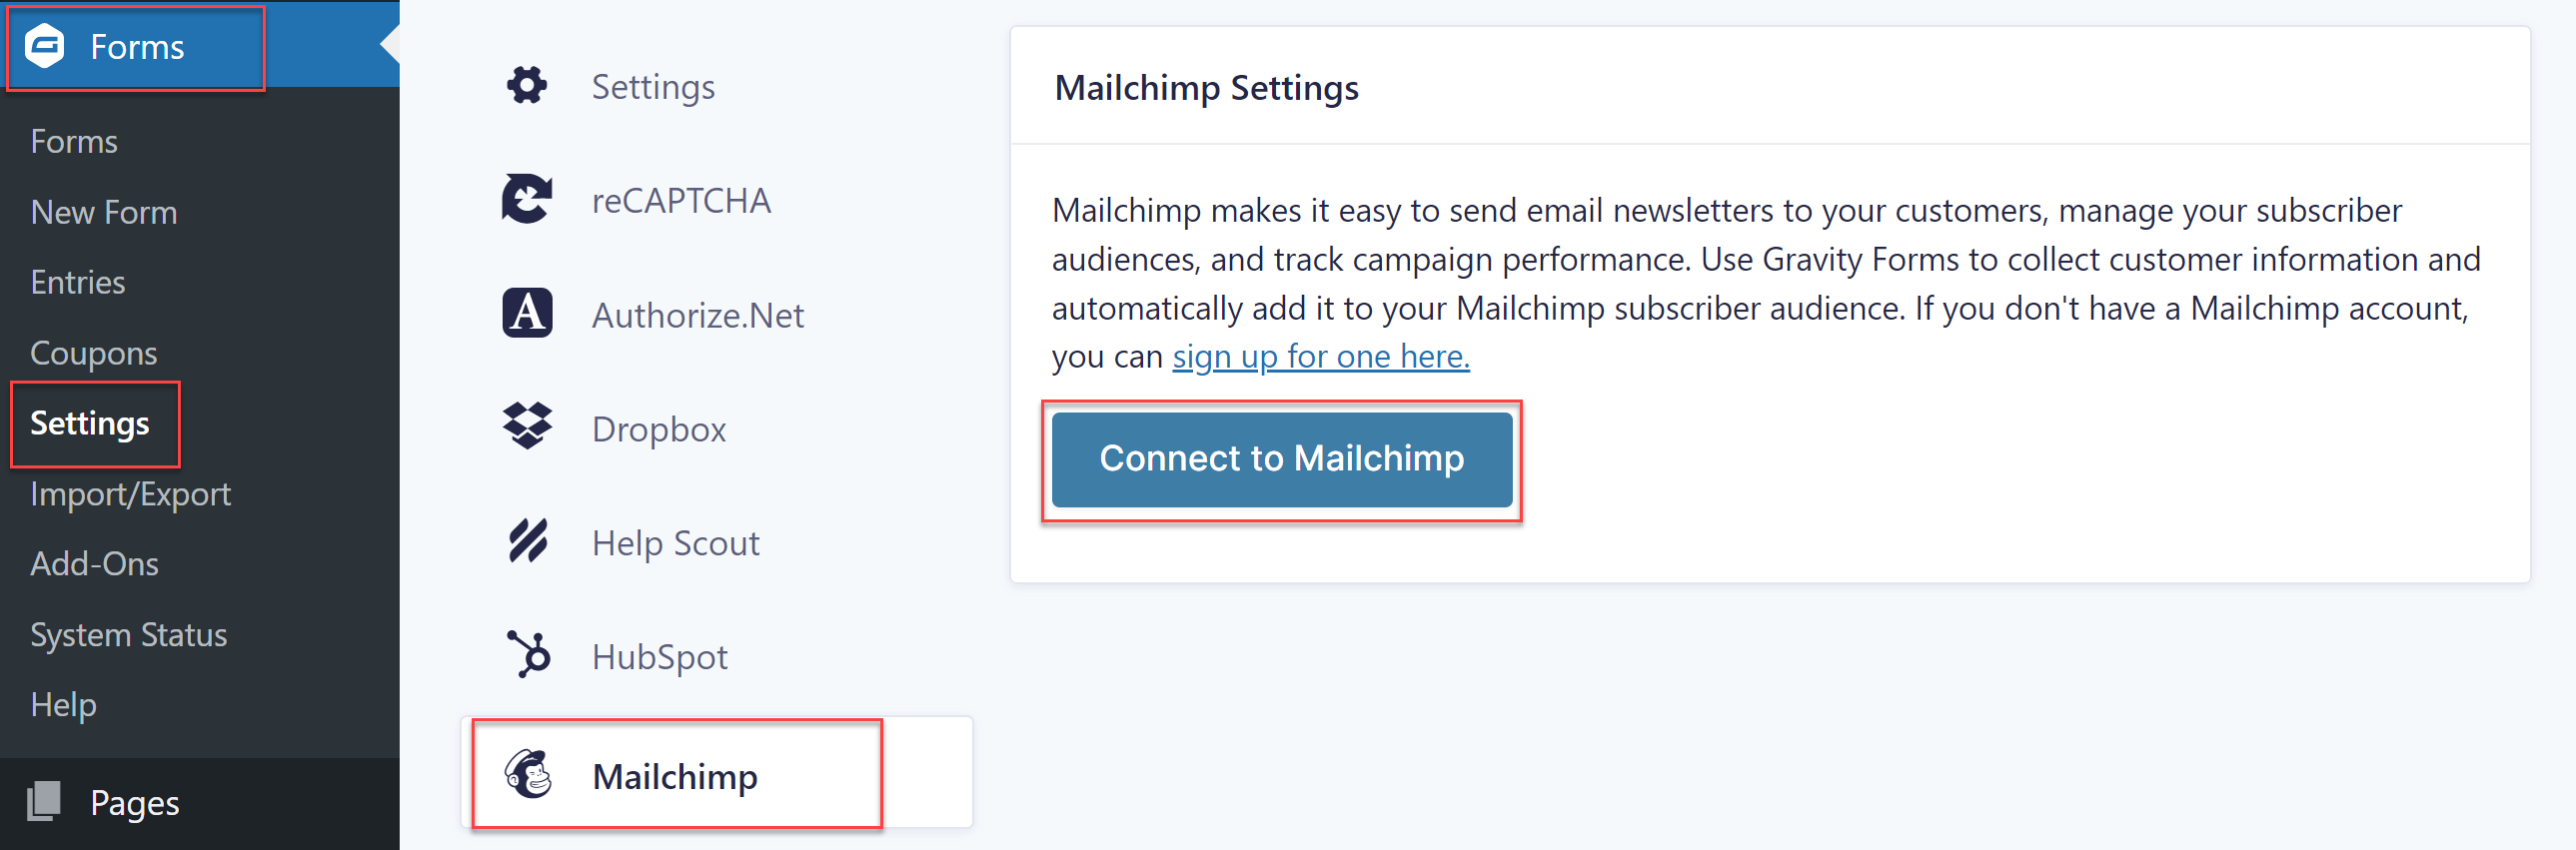 Connect to Mailchimp